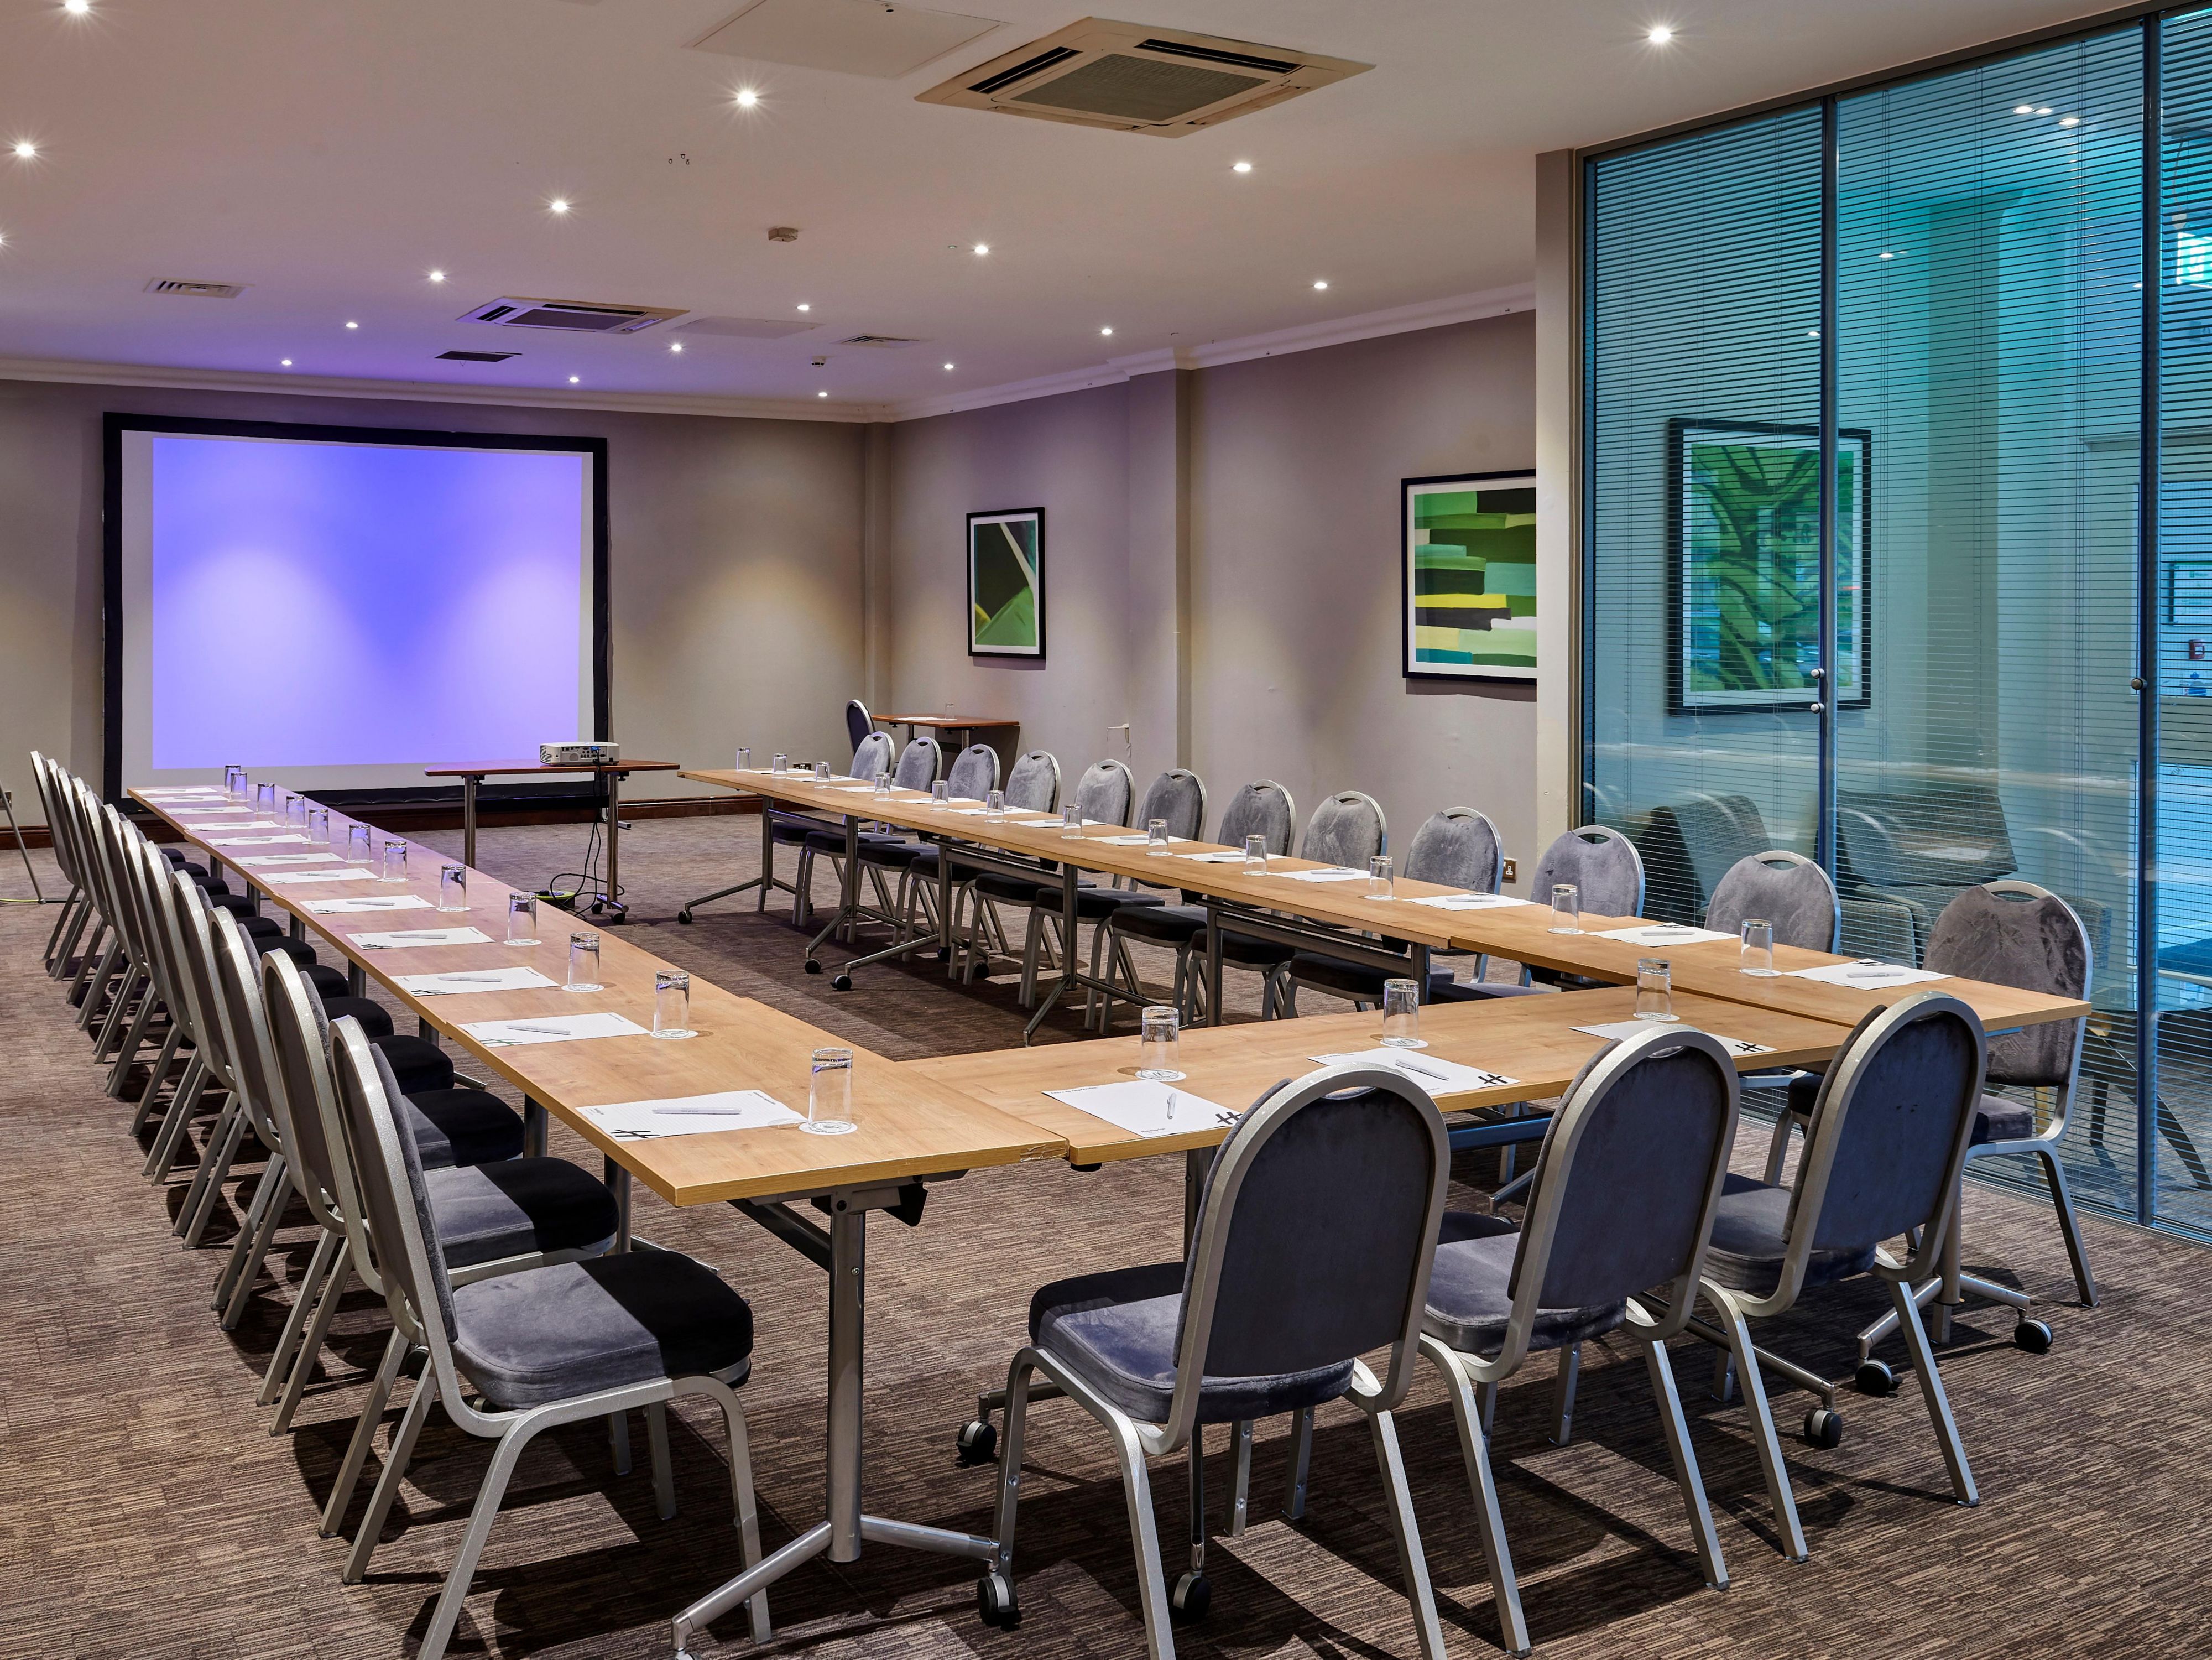 The hotel’s dedicated events centre provides space for up to 200 people, with 6 flexible, air-conditioned conference suites equipped with AV equipment and free Wi-Fi.